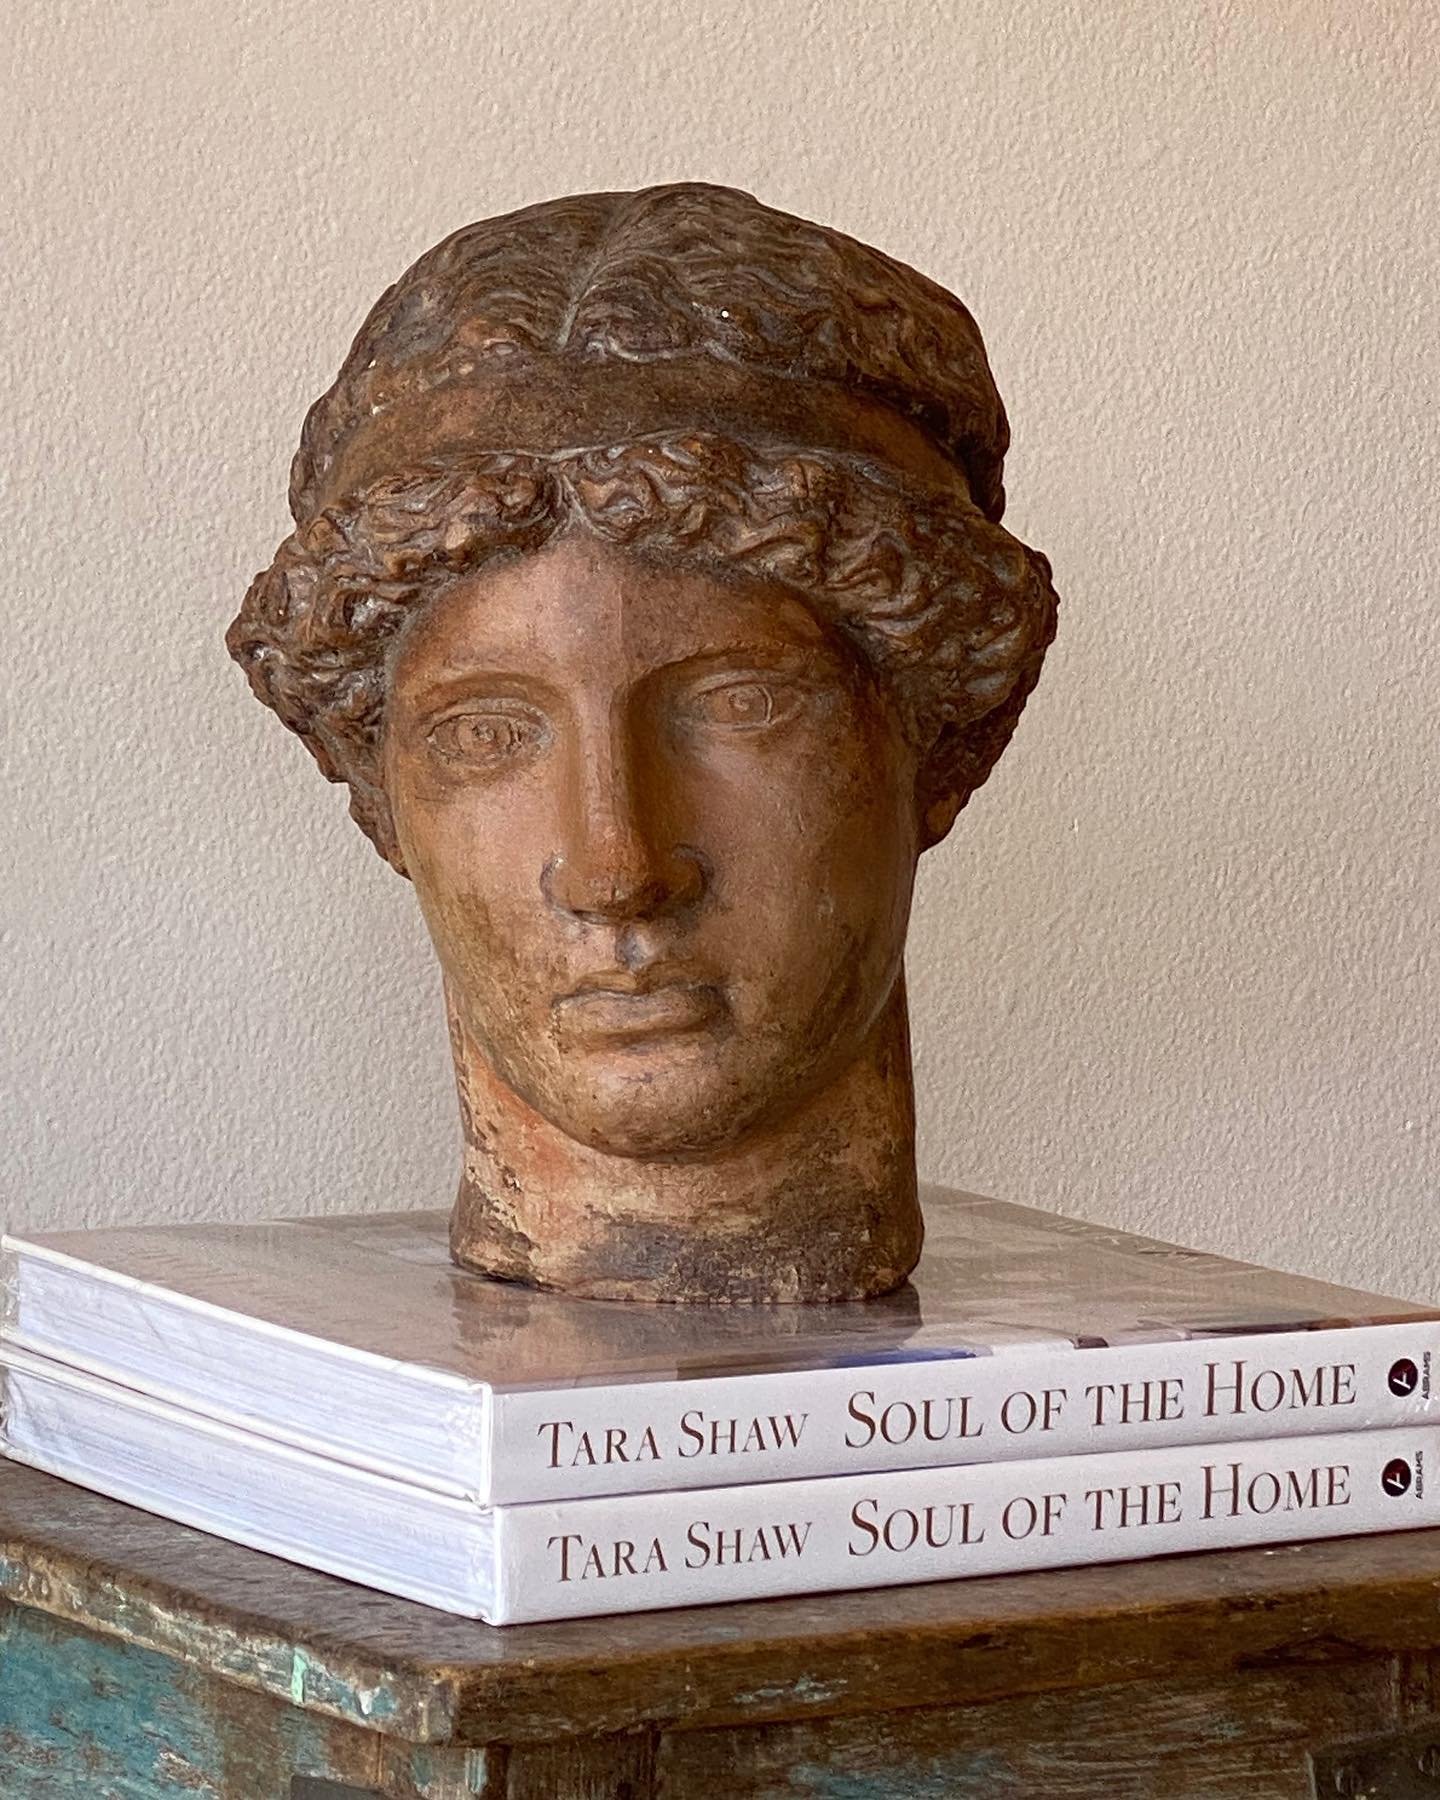 Hey handsome&hellip;

Stop into the shop this week to check out this Roman circa 1850 bust found in the Lombard region of Italy. Explore our full collection of antiques, art, furniture, and more!

Visit us on Balboa Island or message us with any inqu